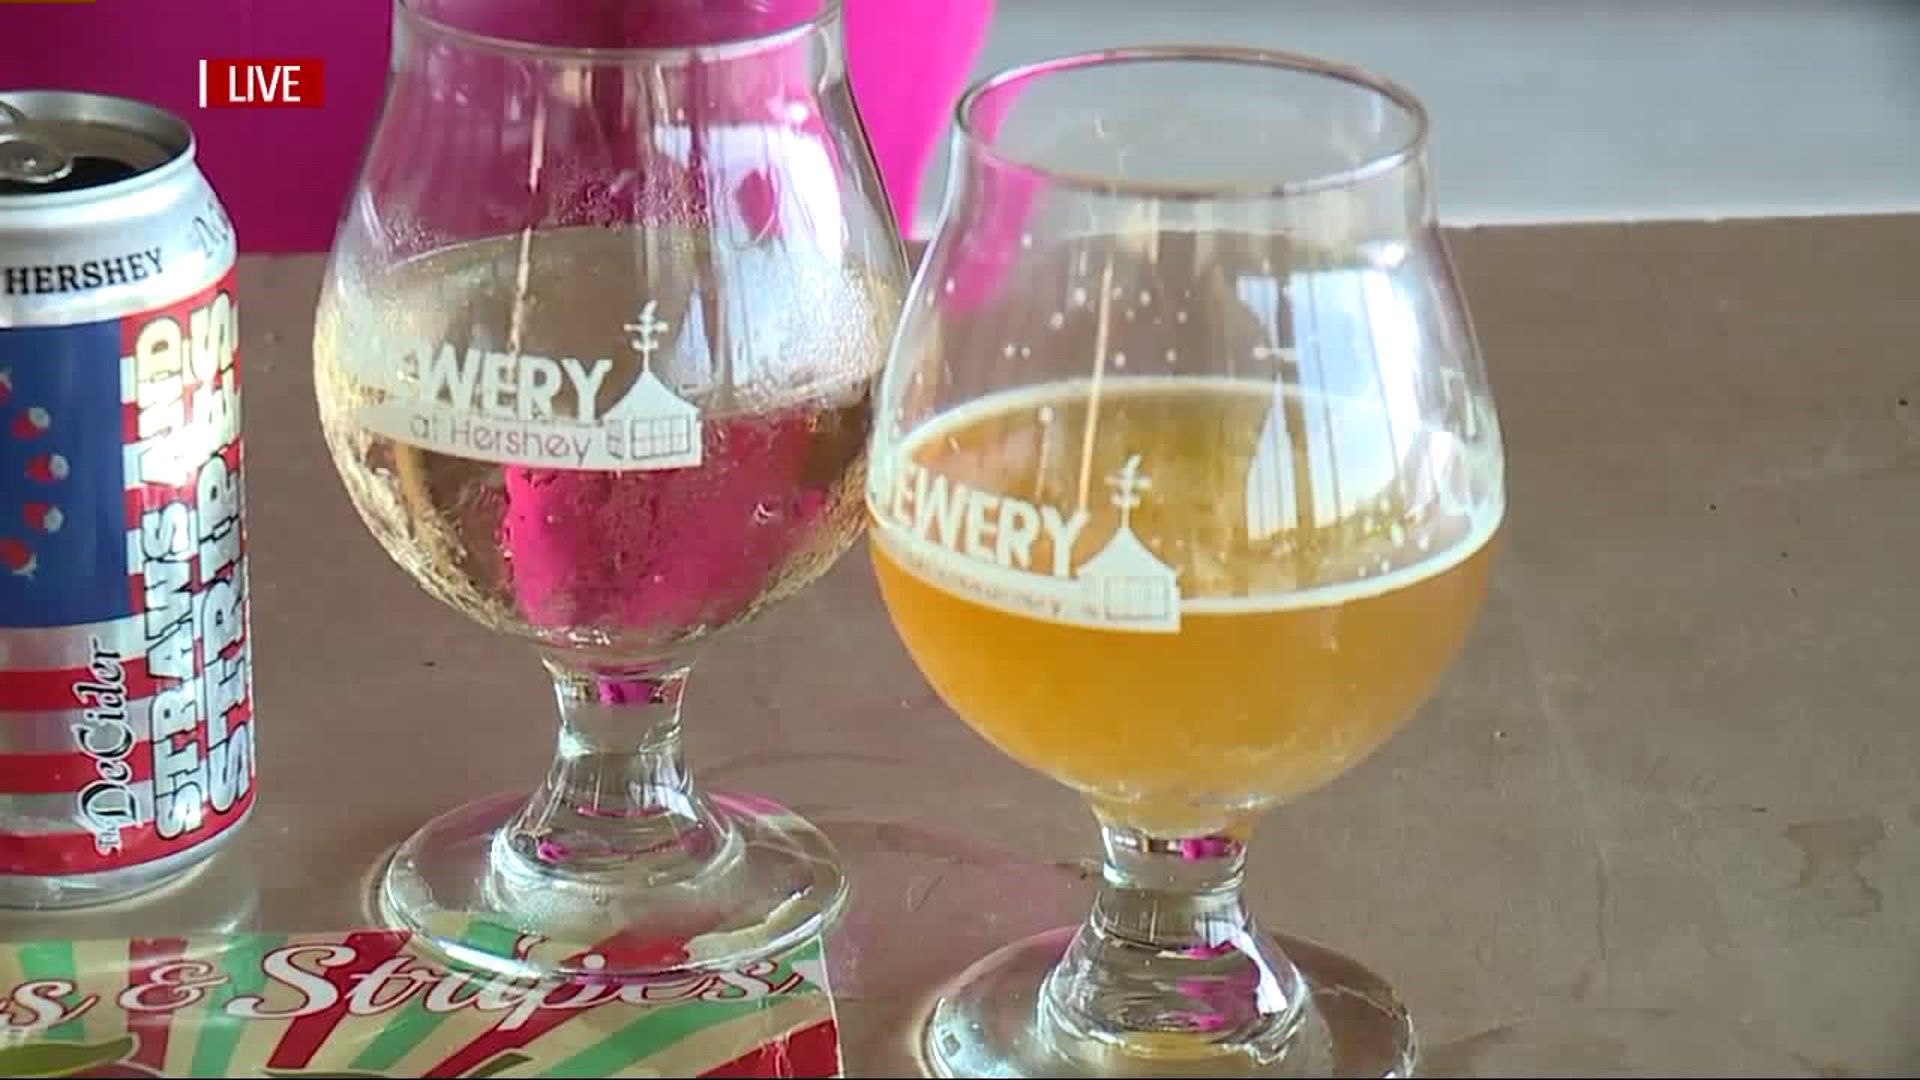 The Vineyard and Brewery at Hershey is releasing new wine and beer at its annual Straws and Stripes Festival